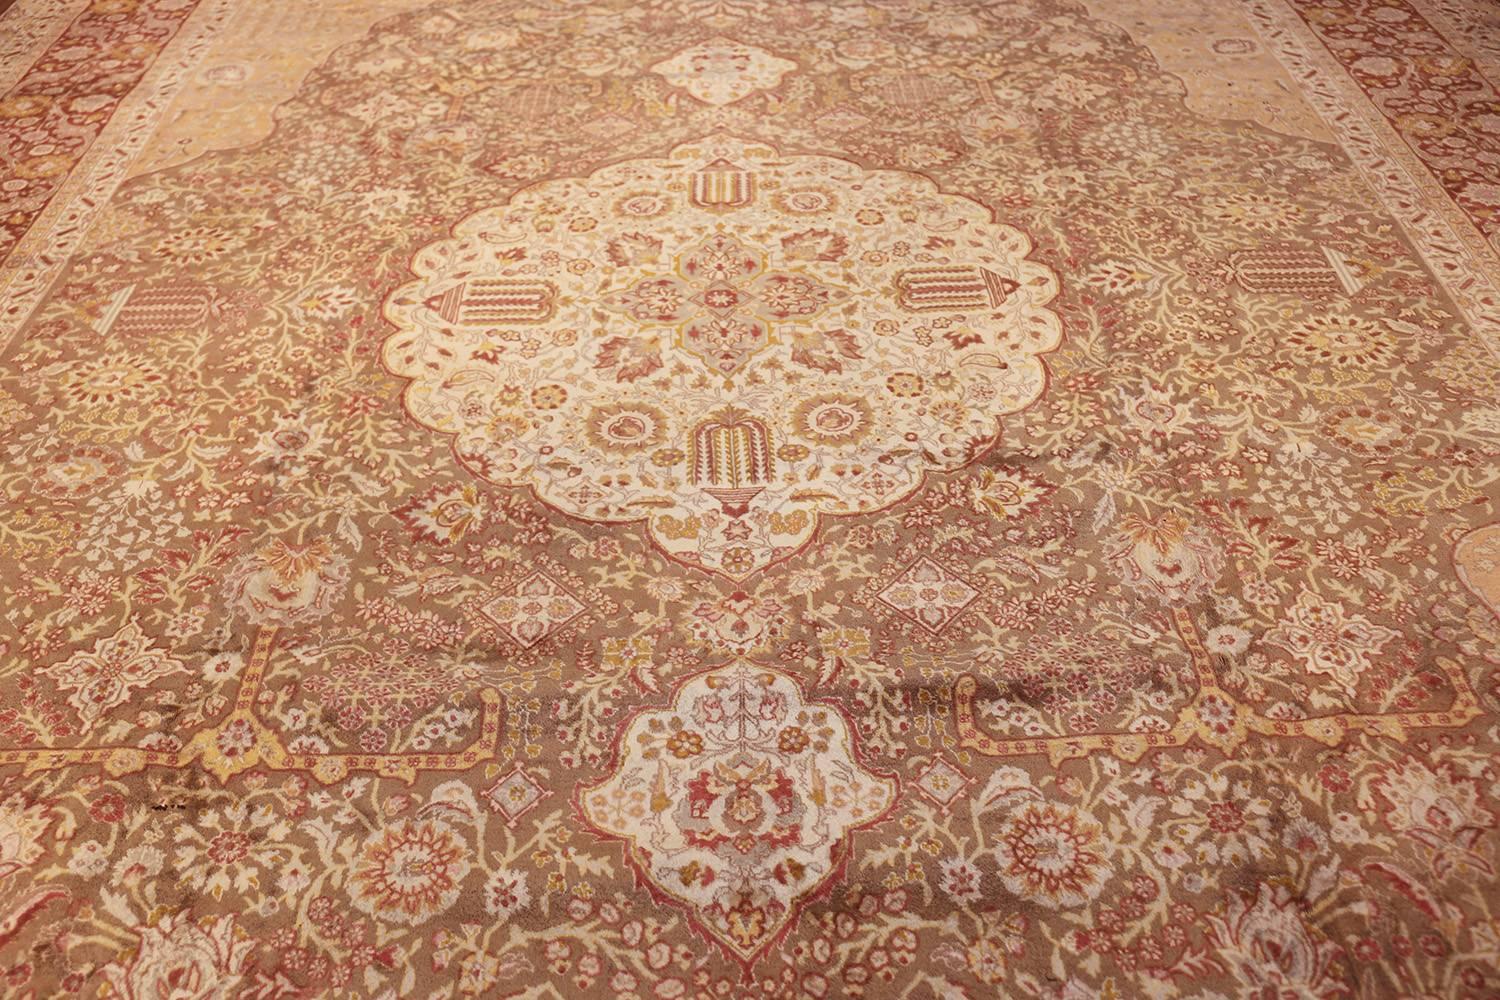 Hand-Knotted Vintage Room Sized Persian Tabriz Carpet. Size: 9 ft 9 in x 13 ft